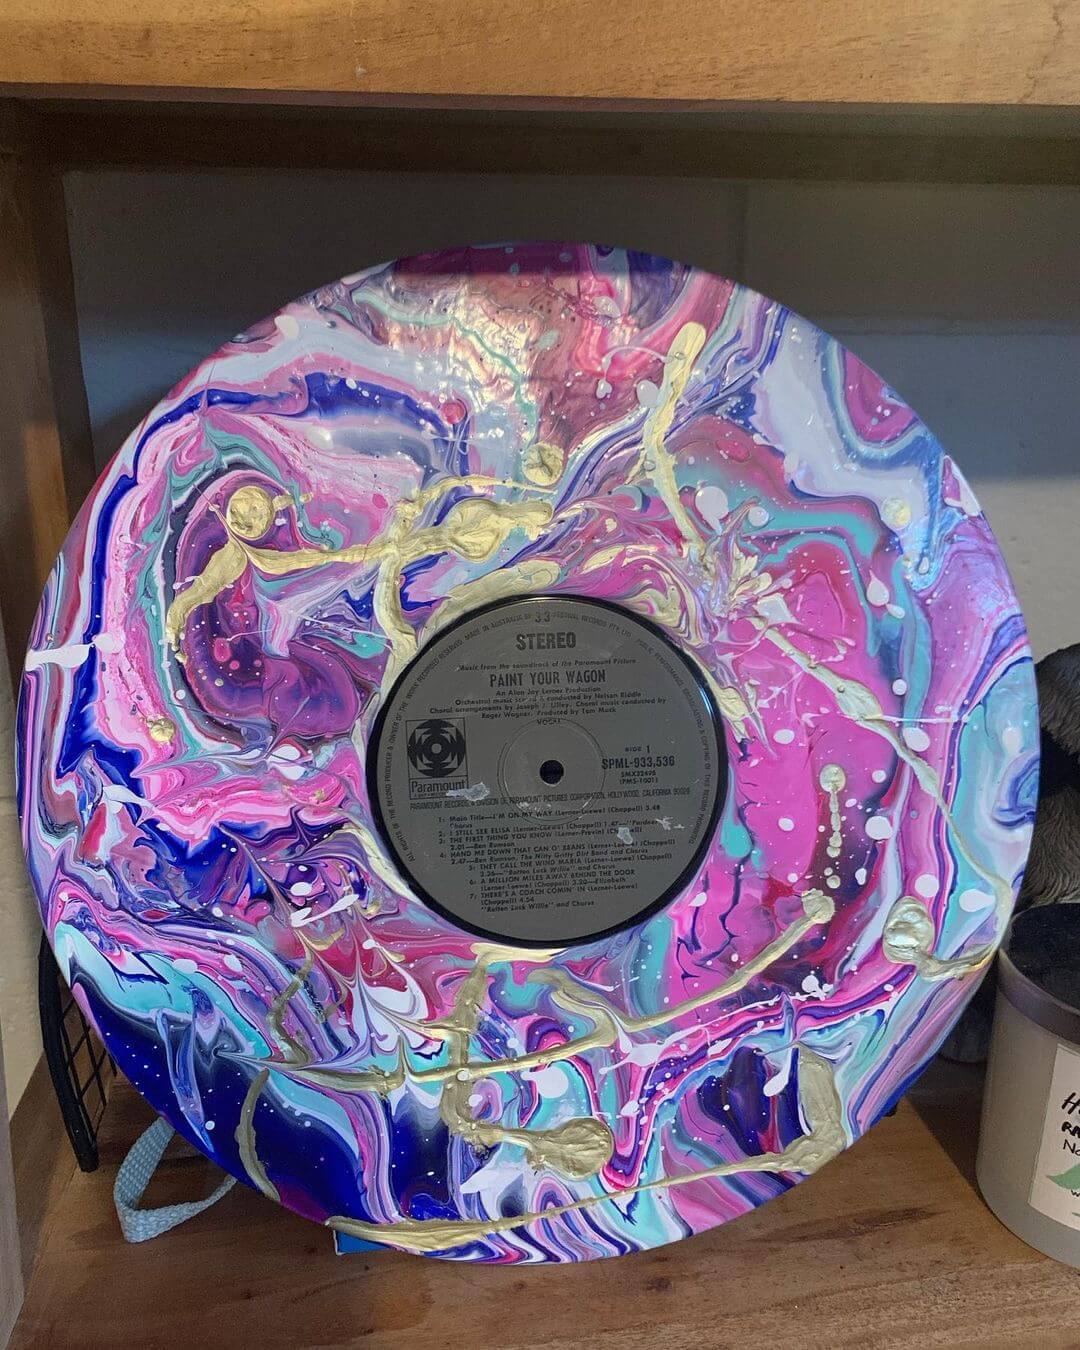 Purple, blue and white pour painted vinyl record.